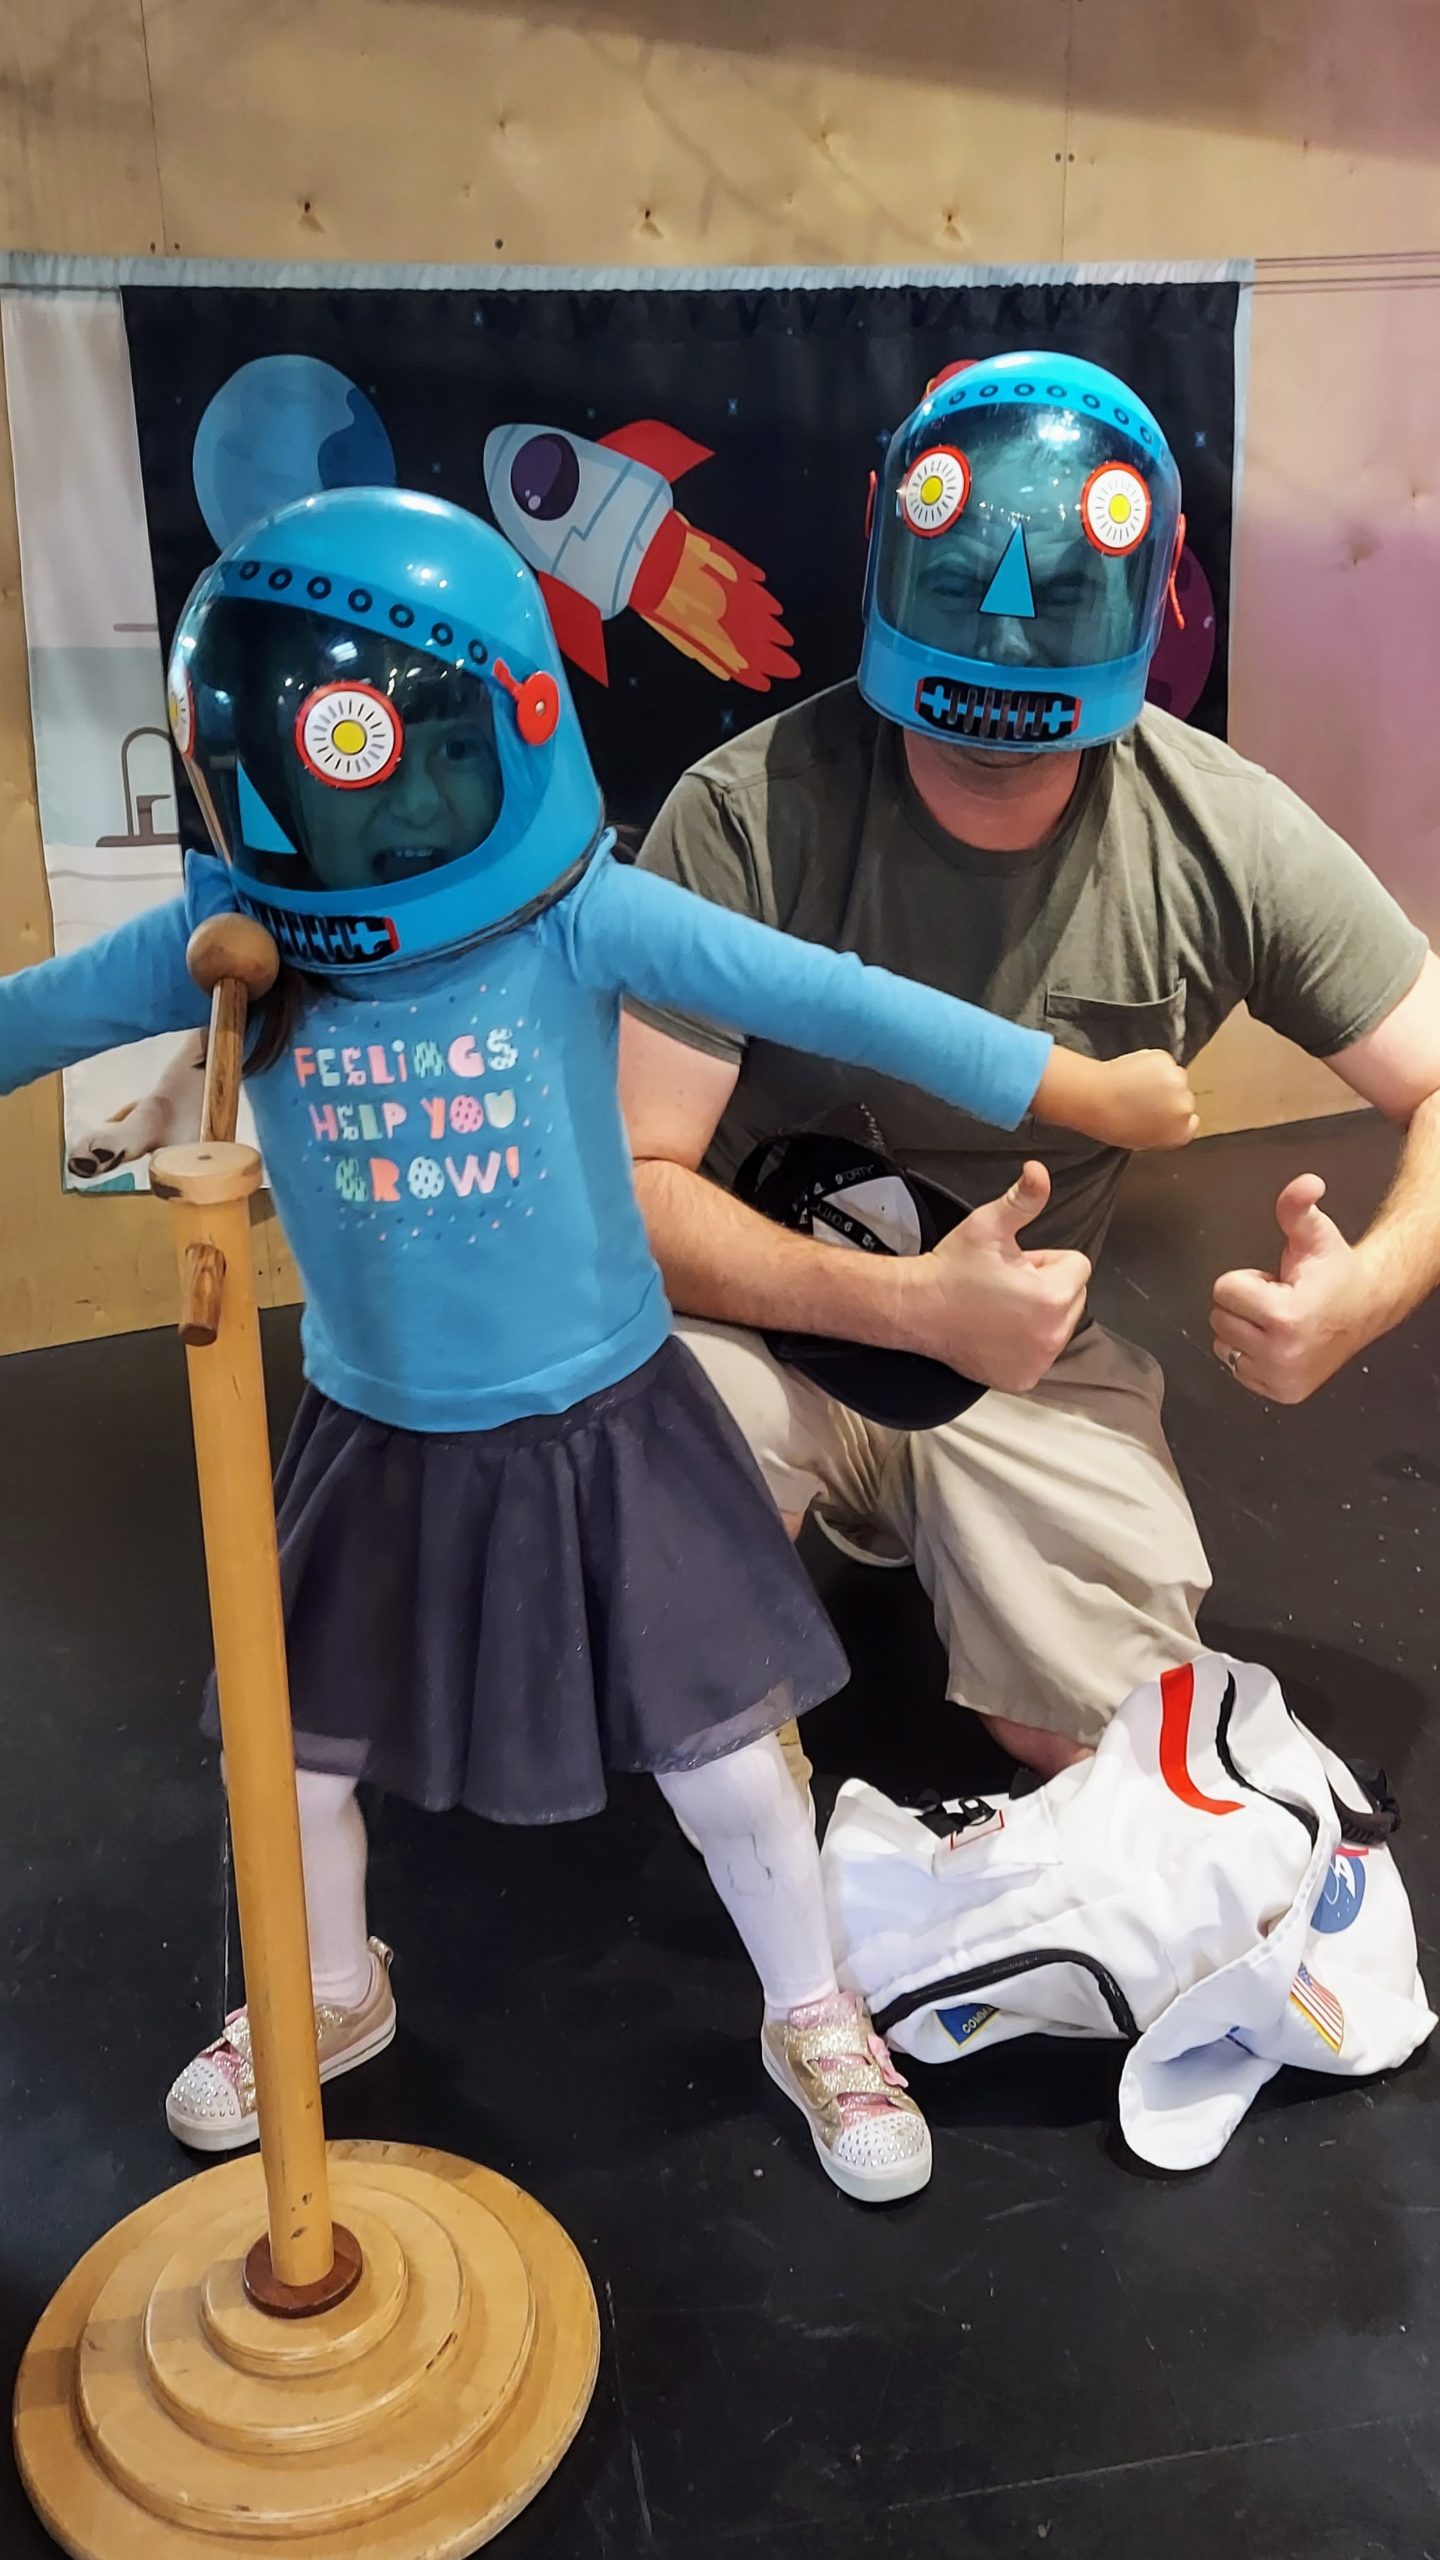 A daughter and dad, dressed in blue astronaut helmets, pose together in front of a wooden microphone.